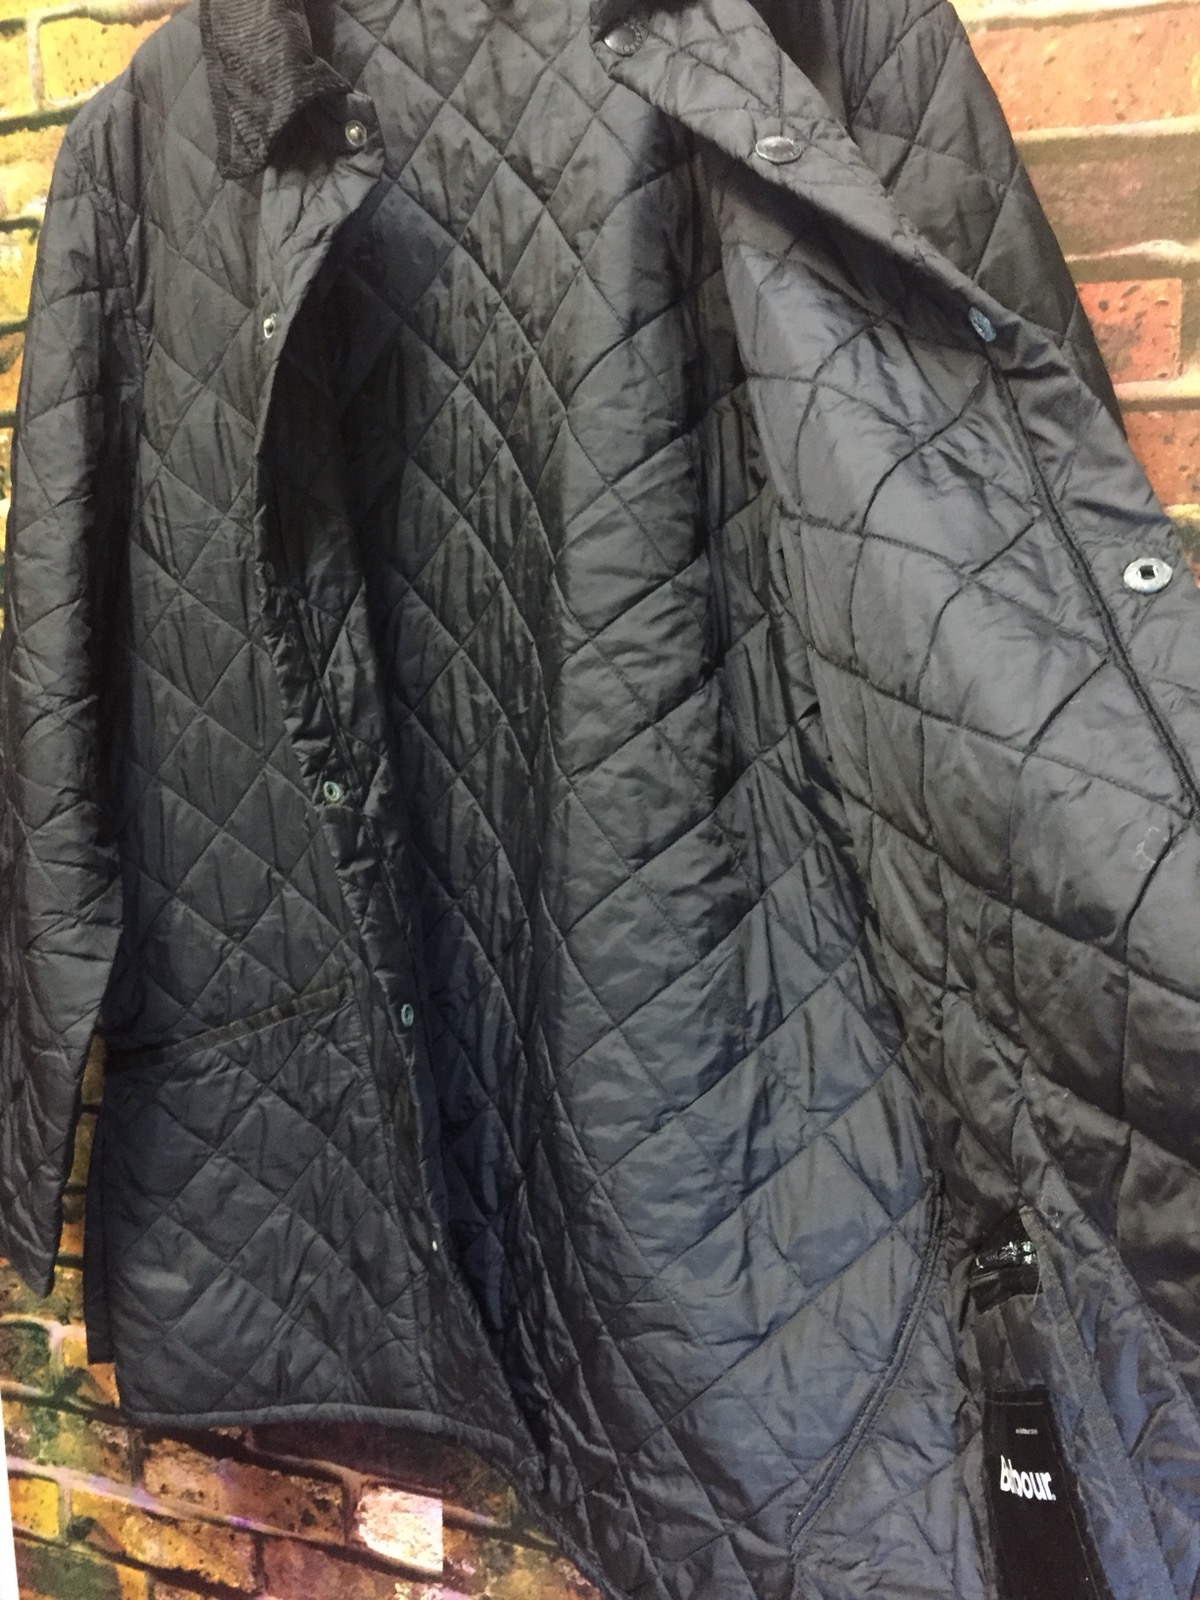 Barbour People — Sebastian had been looking for a new quilted